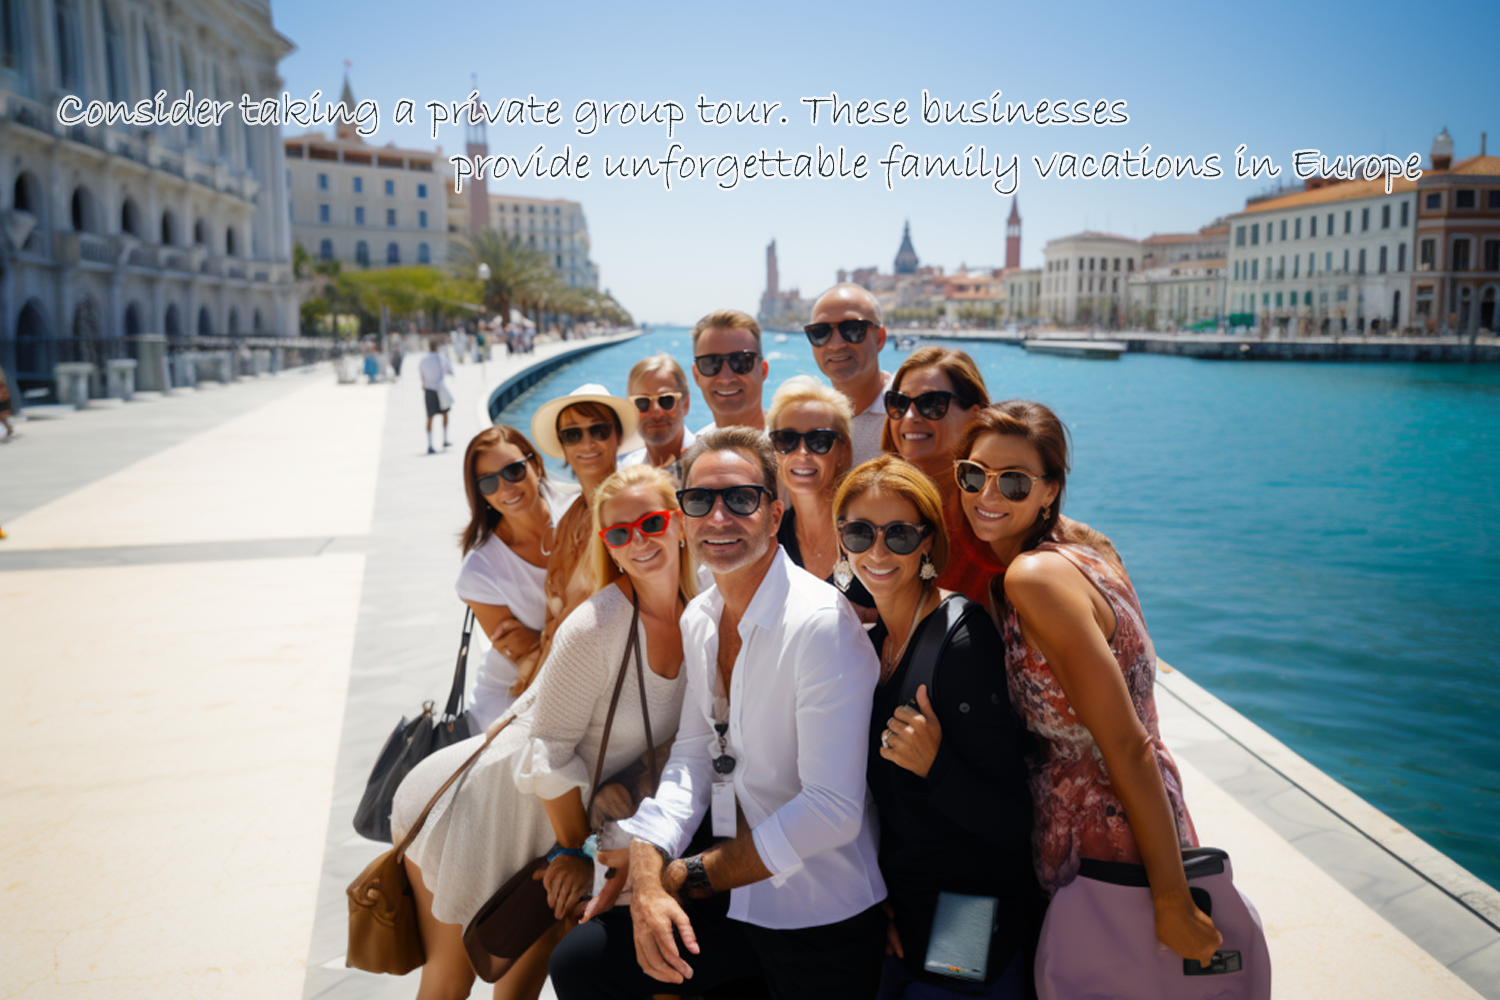 Consider taking a private group tour. These businesses provide unforgettable family vacations in Europe